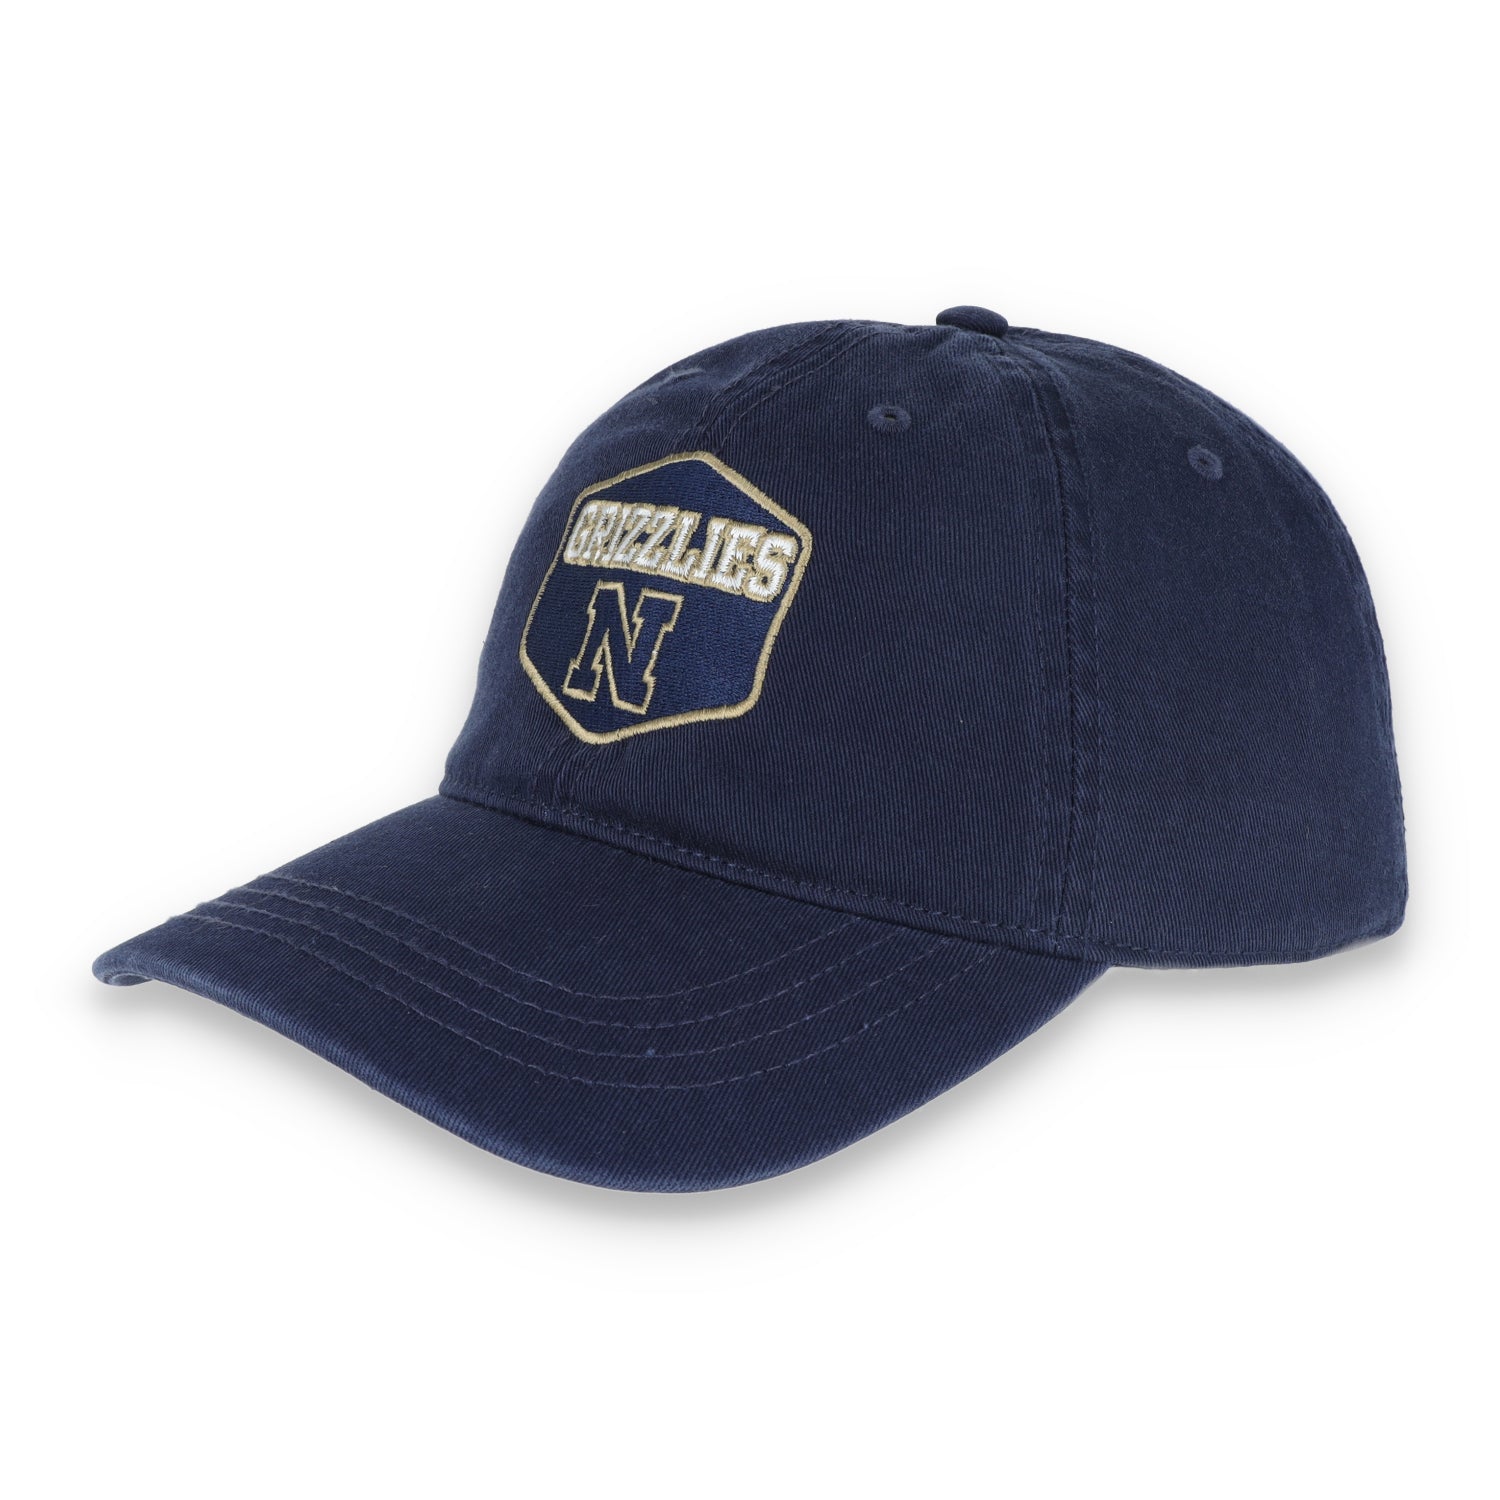 Napa High Grizzlies Relaxed Adjustable Cap-Navy